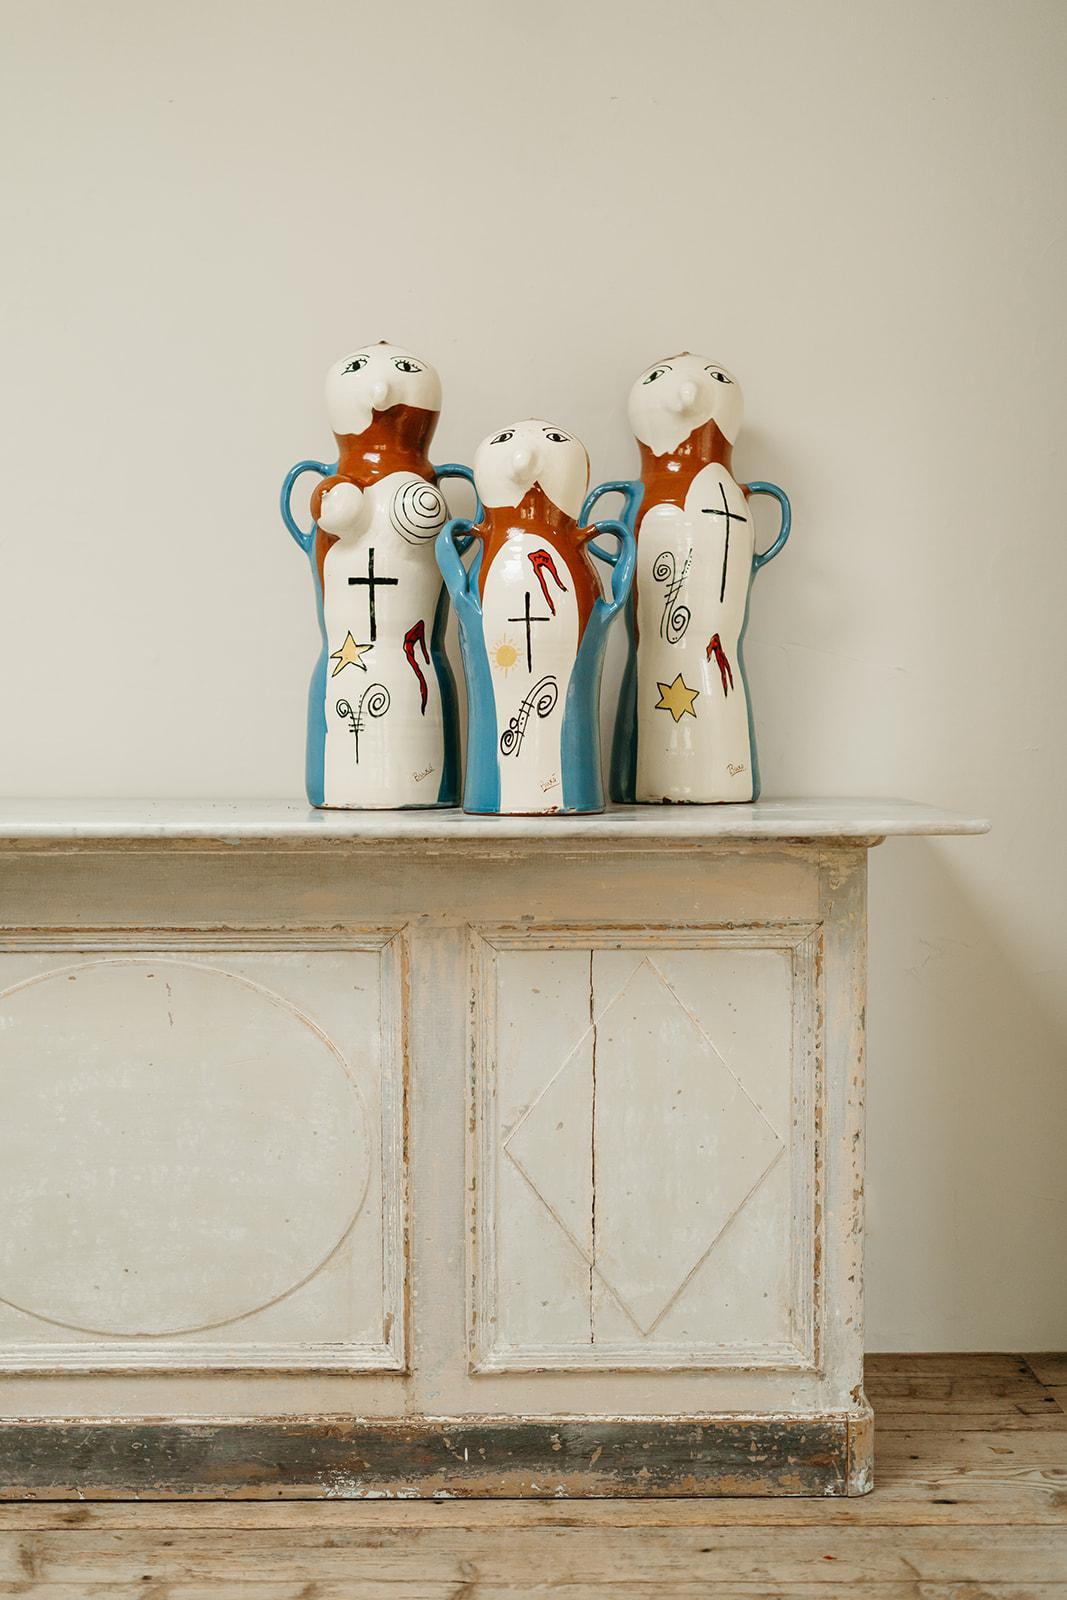 the family ! rare to find these 3 Buxo vases together .. 
decorative fun objects that will bring a smile to your face ..
mama 67 cm high x 30 cm wide and 28 cm deep
papa 67 cm high x 32 cm wide and 23 cm deep 
baby 54 cm high x 28 cm wide and 23 cm